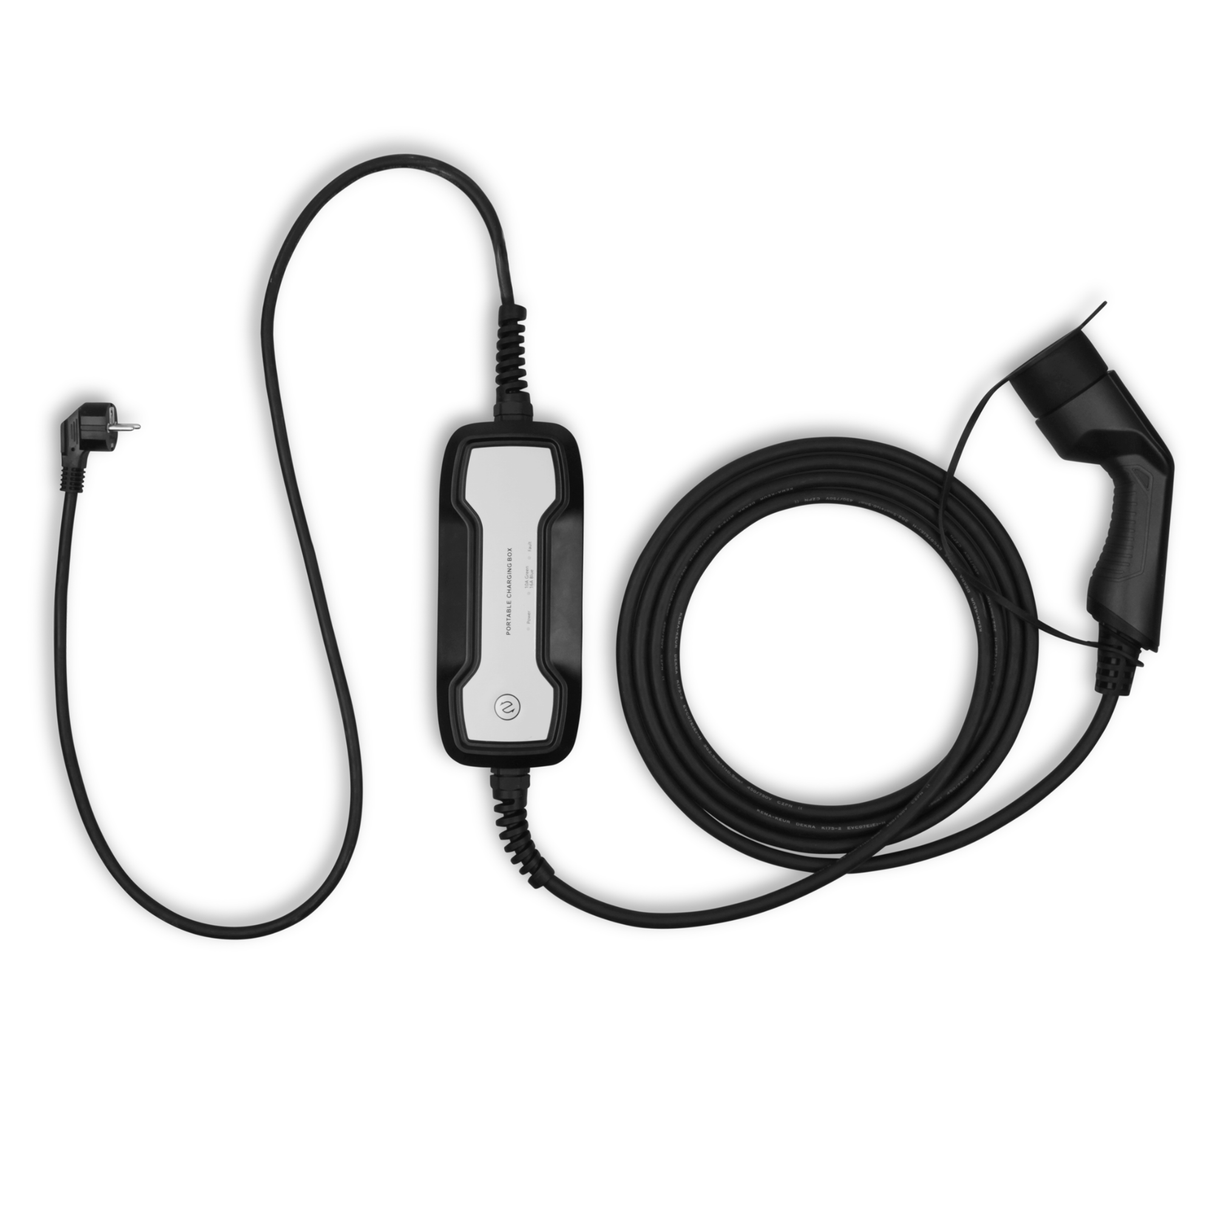 Mobile charger Volvo C40 - Besen - Type 2 to Schuko